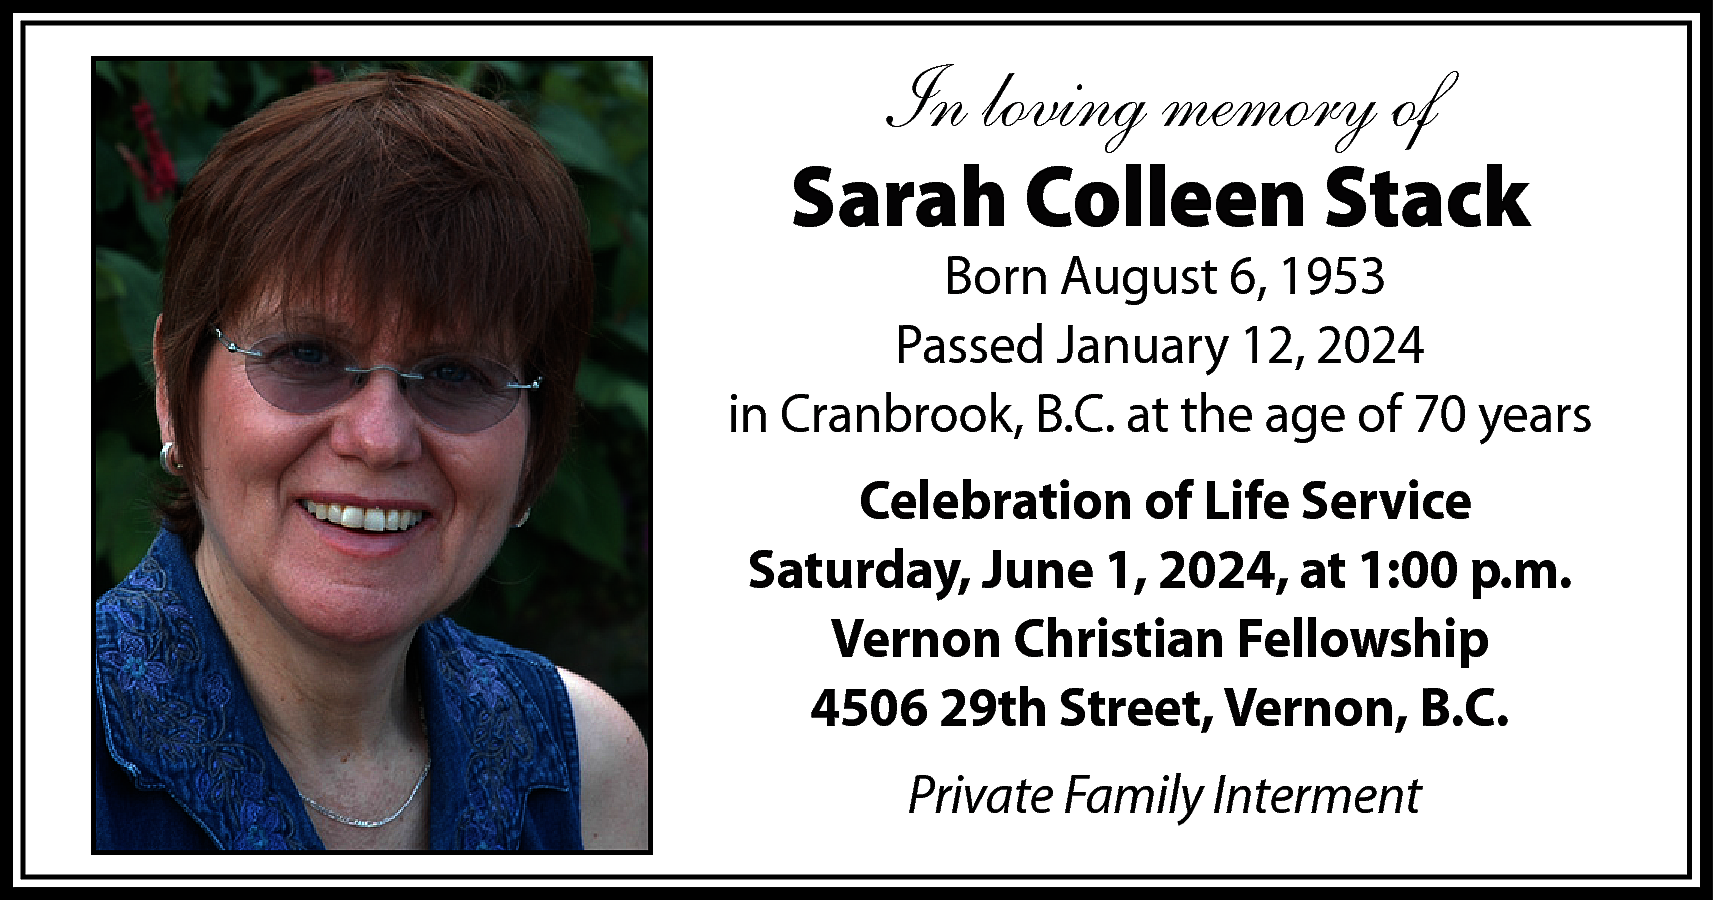 In loving memory of <br>Sarah  In loving memory of  Sarah Colleen Stack    Born August 6, 1953  Passed January 12, 2024  in Cranbrook, B.C. at the age of 70 years  Celebration of Life Service  Saturday, June 1, 2024, at 1:00 p.m.  Vernon Christian Fellowship  4506 29th Street, Vernon, B.C.  Private Family Interment    